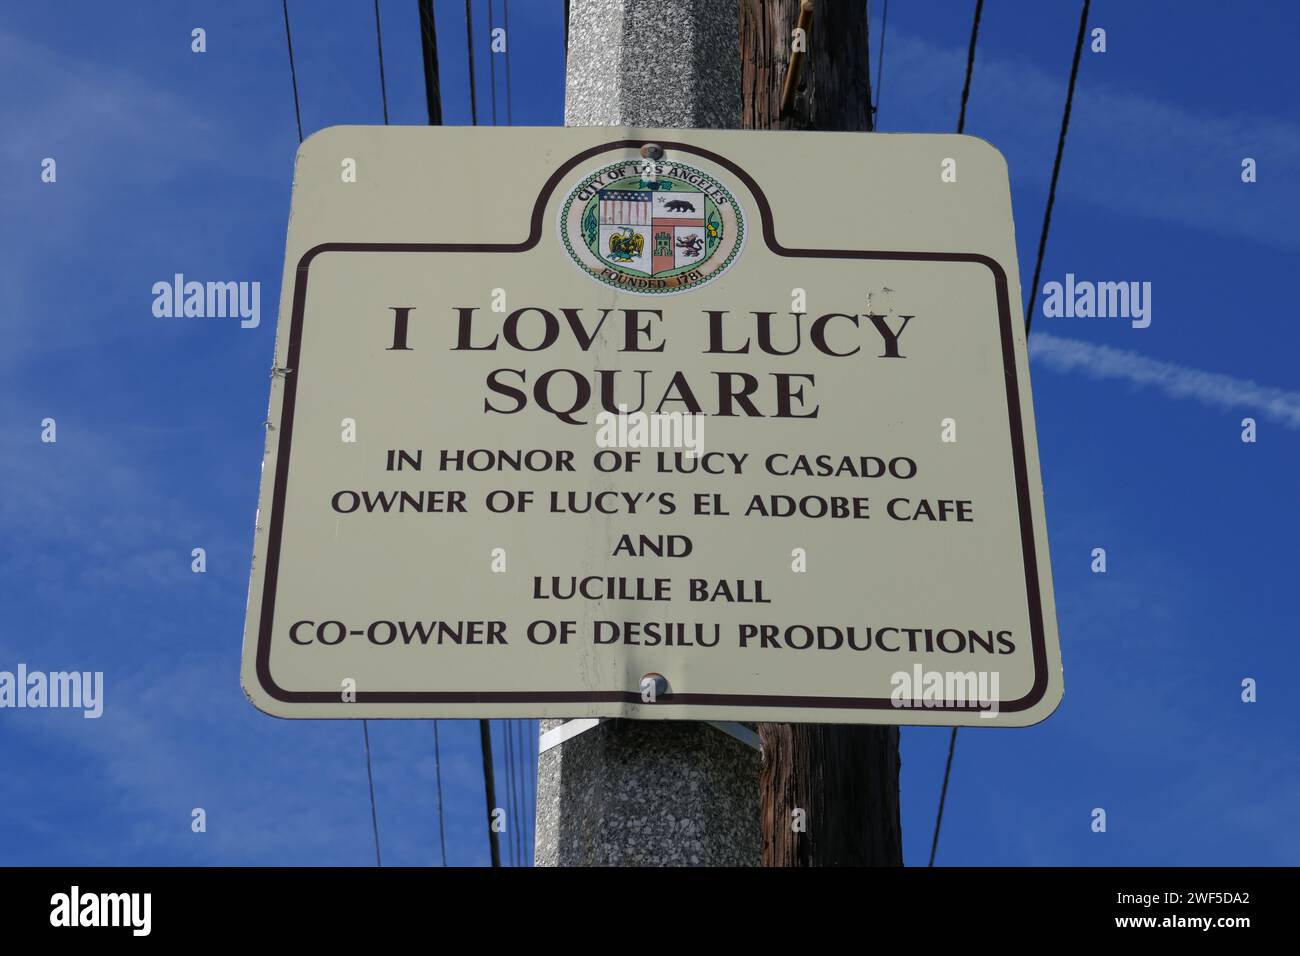 Los Angeles, California, USA 27th January 2024 I Love Lucy Square Sign, in Honor of Lucy Casado, Owner of LucyÕs El Adobe Cafe and Lucille Ball, Co-owner of Desilu Productions and Star of I Love Lucy Sitcom on Melrose Avenue on January 27, 2024 in Los Angeles, California, USA. Photo by Barry King/Alamy Stock Photo Stock Photo